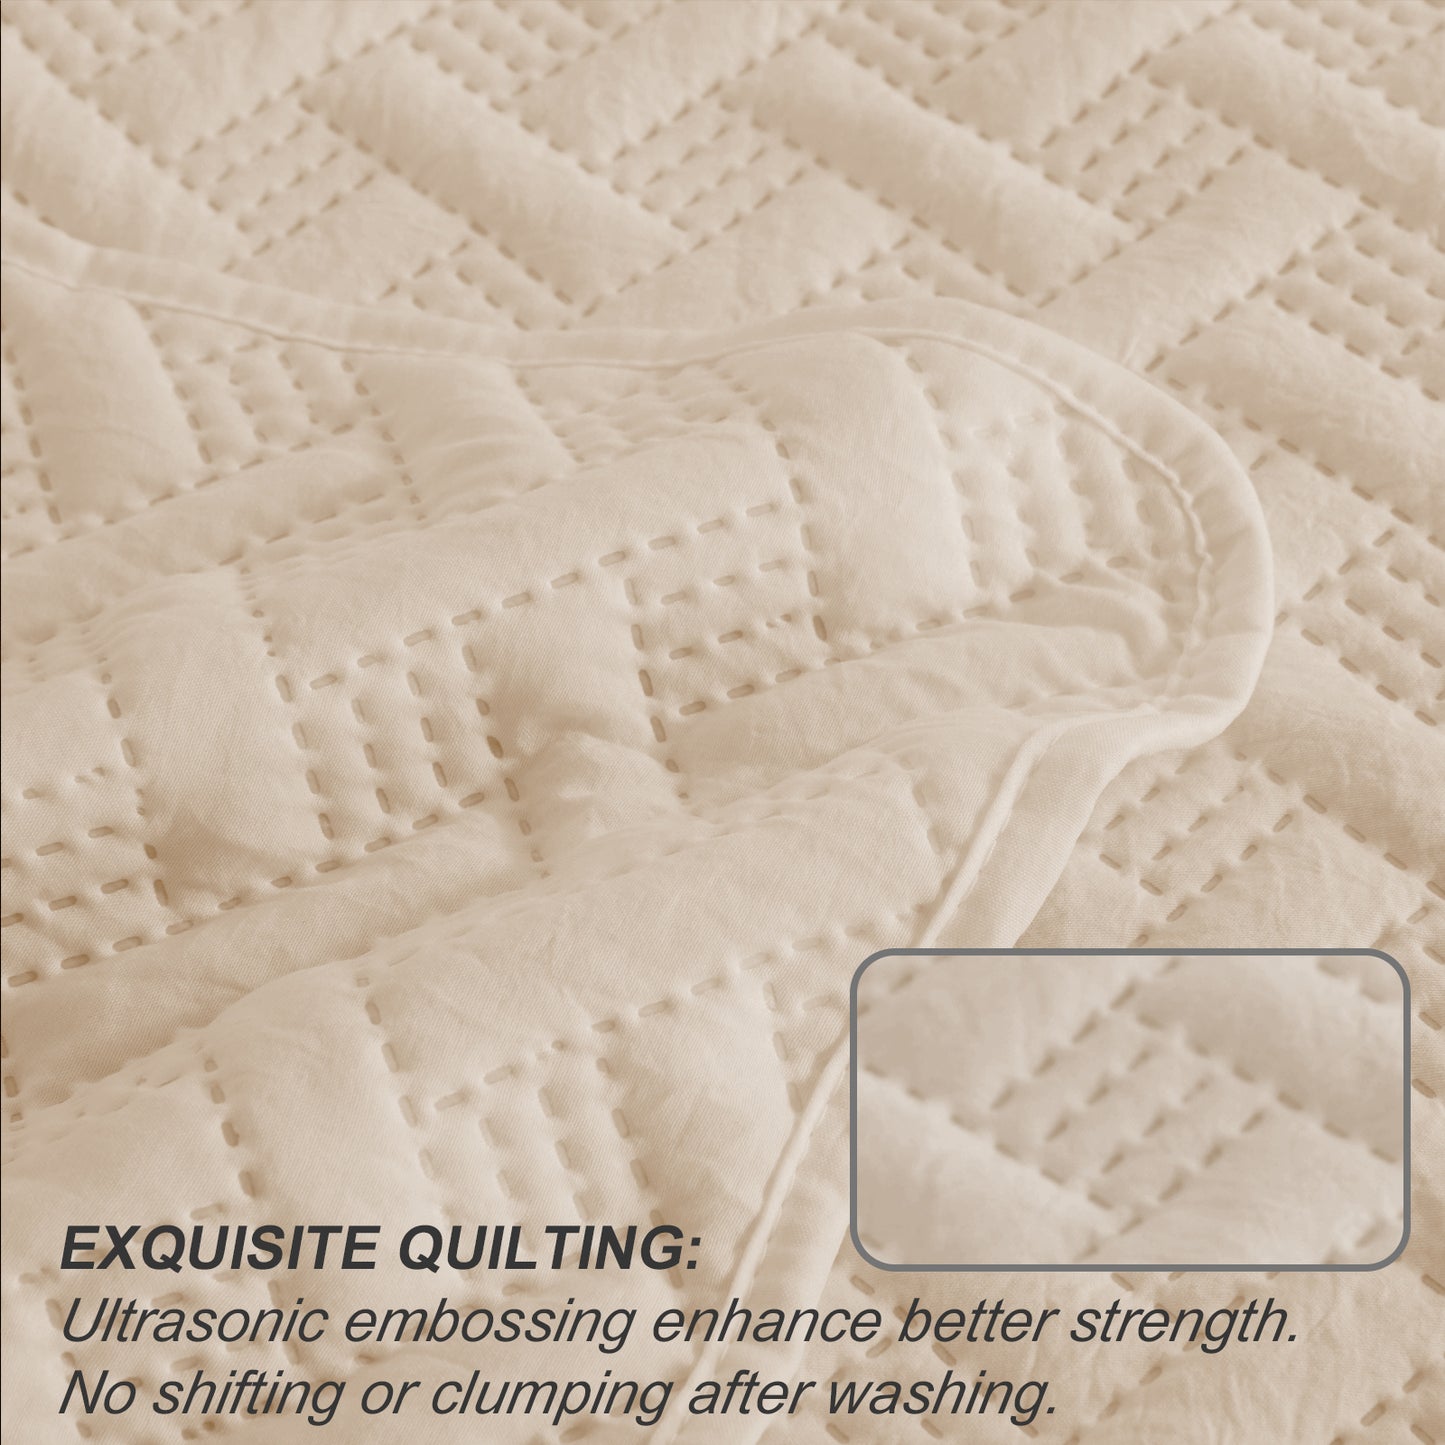 Exclusivo Mezcla 3-Piece Bone Queen Size Quilt Set, Weave Pattern Ultrasonic Lightweight and Soft Quilts/Bedspreads/Coverlets/Bedding Set (1 Quilt, 2 Pillow Shams) for All Seasons